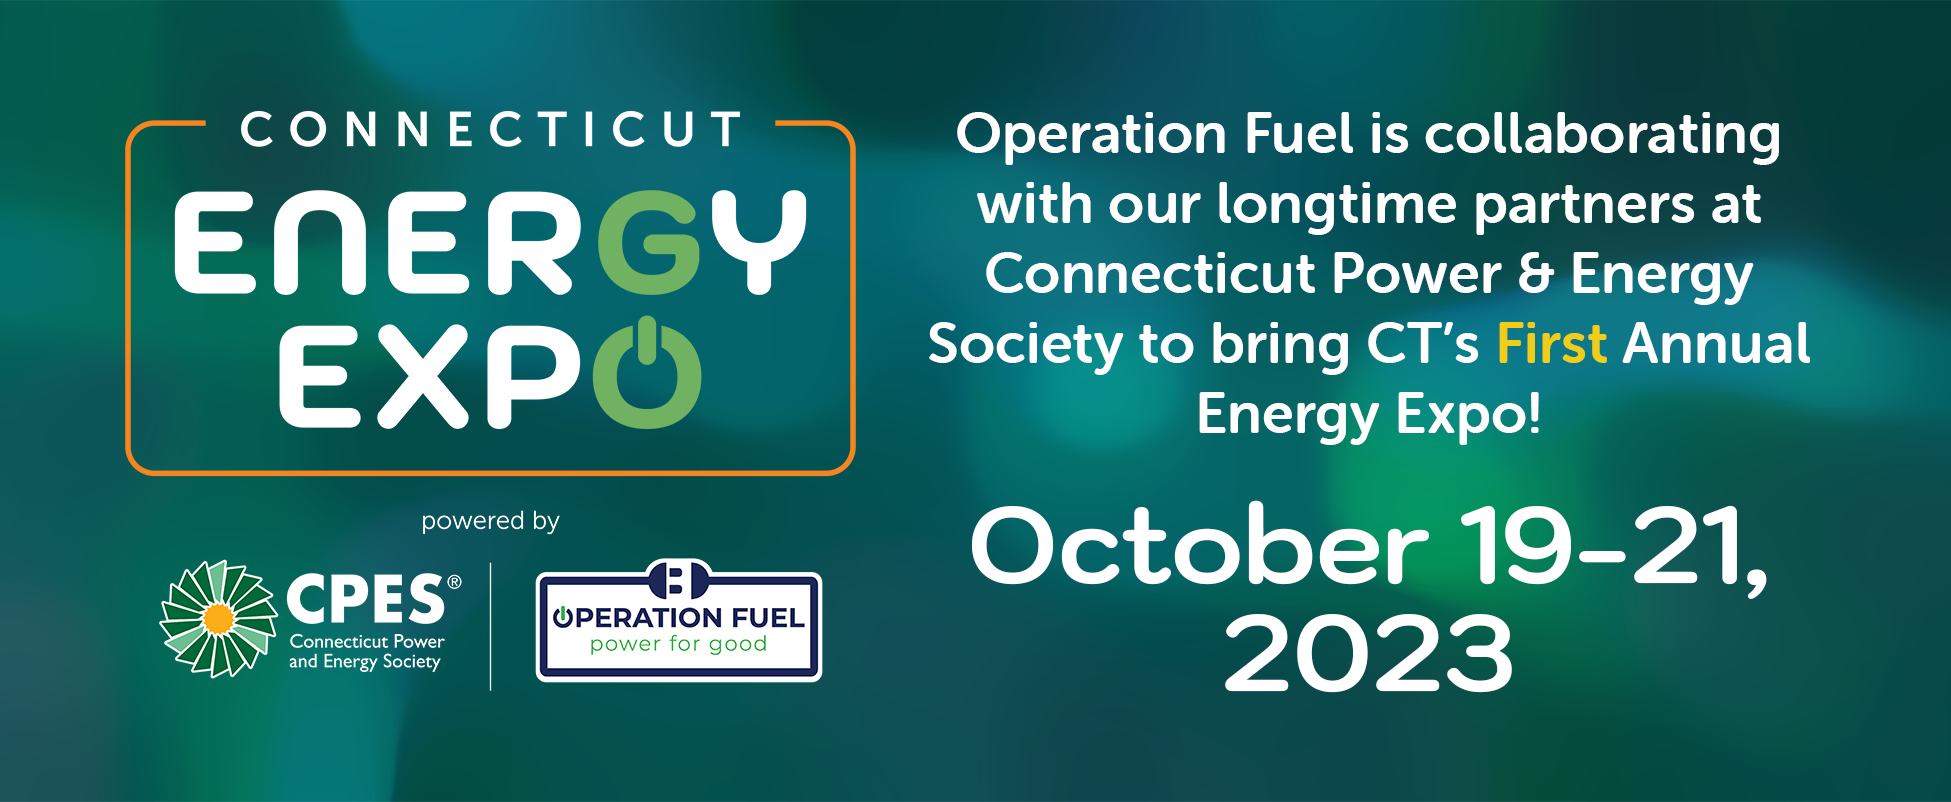 Operation fuel collaborates with connecticut power and energy society to bring you ct's first annual energy expo